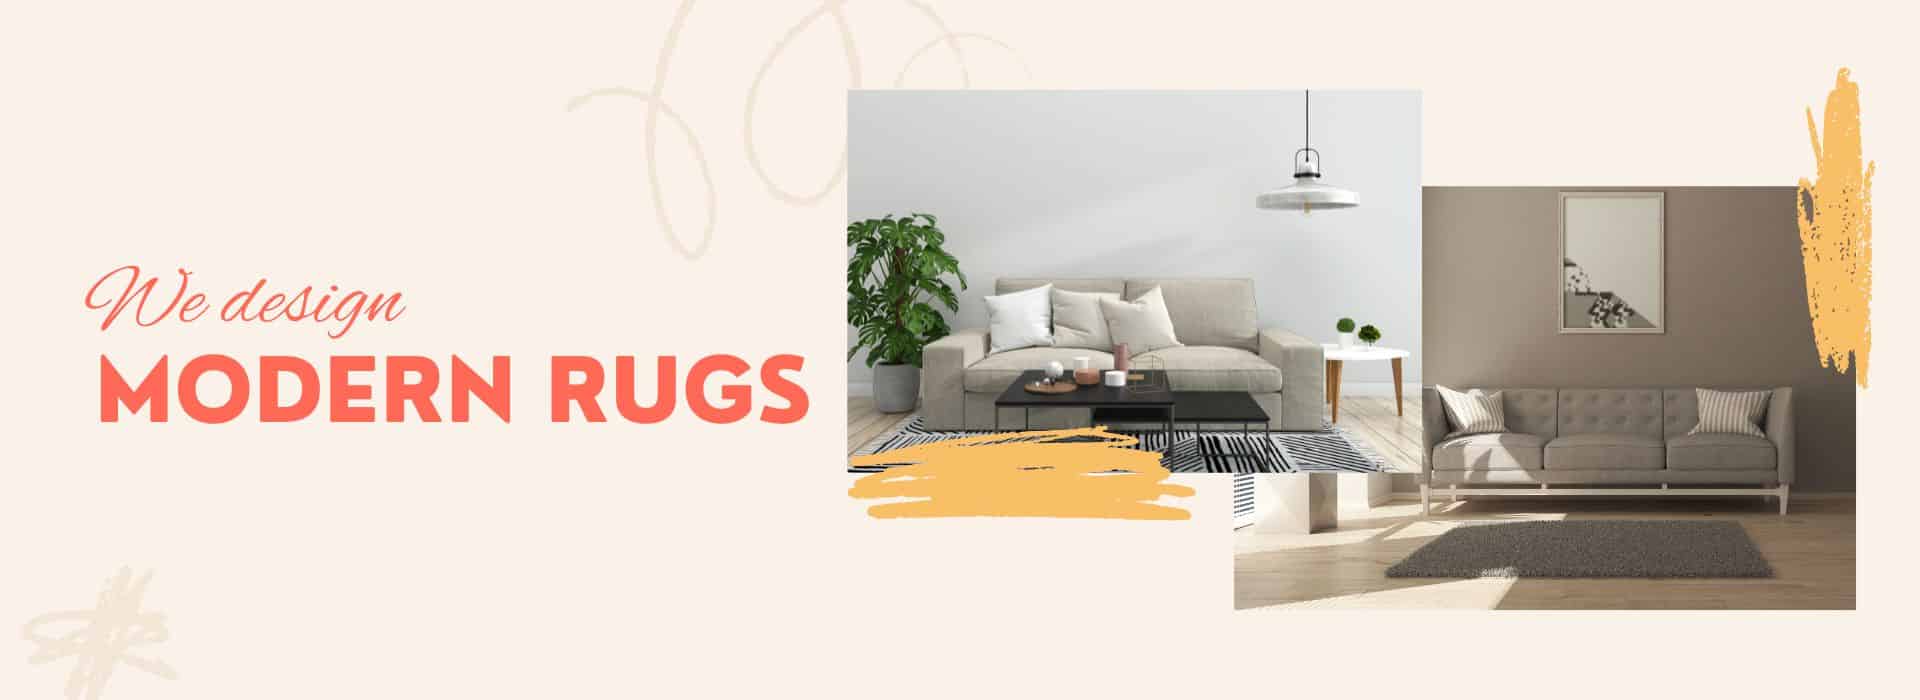 Get Amazing Modern Rugs at Best Prices | Order Today